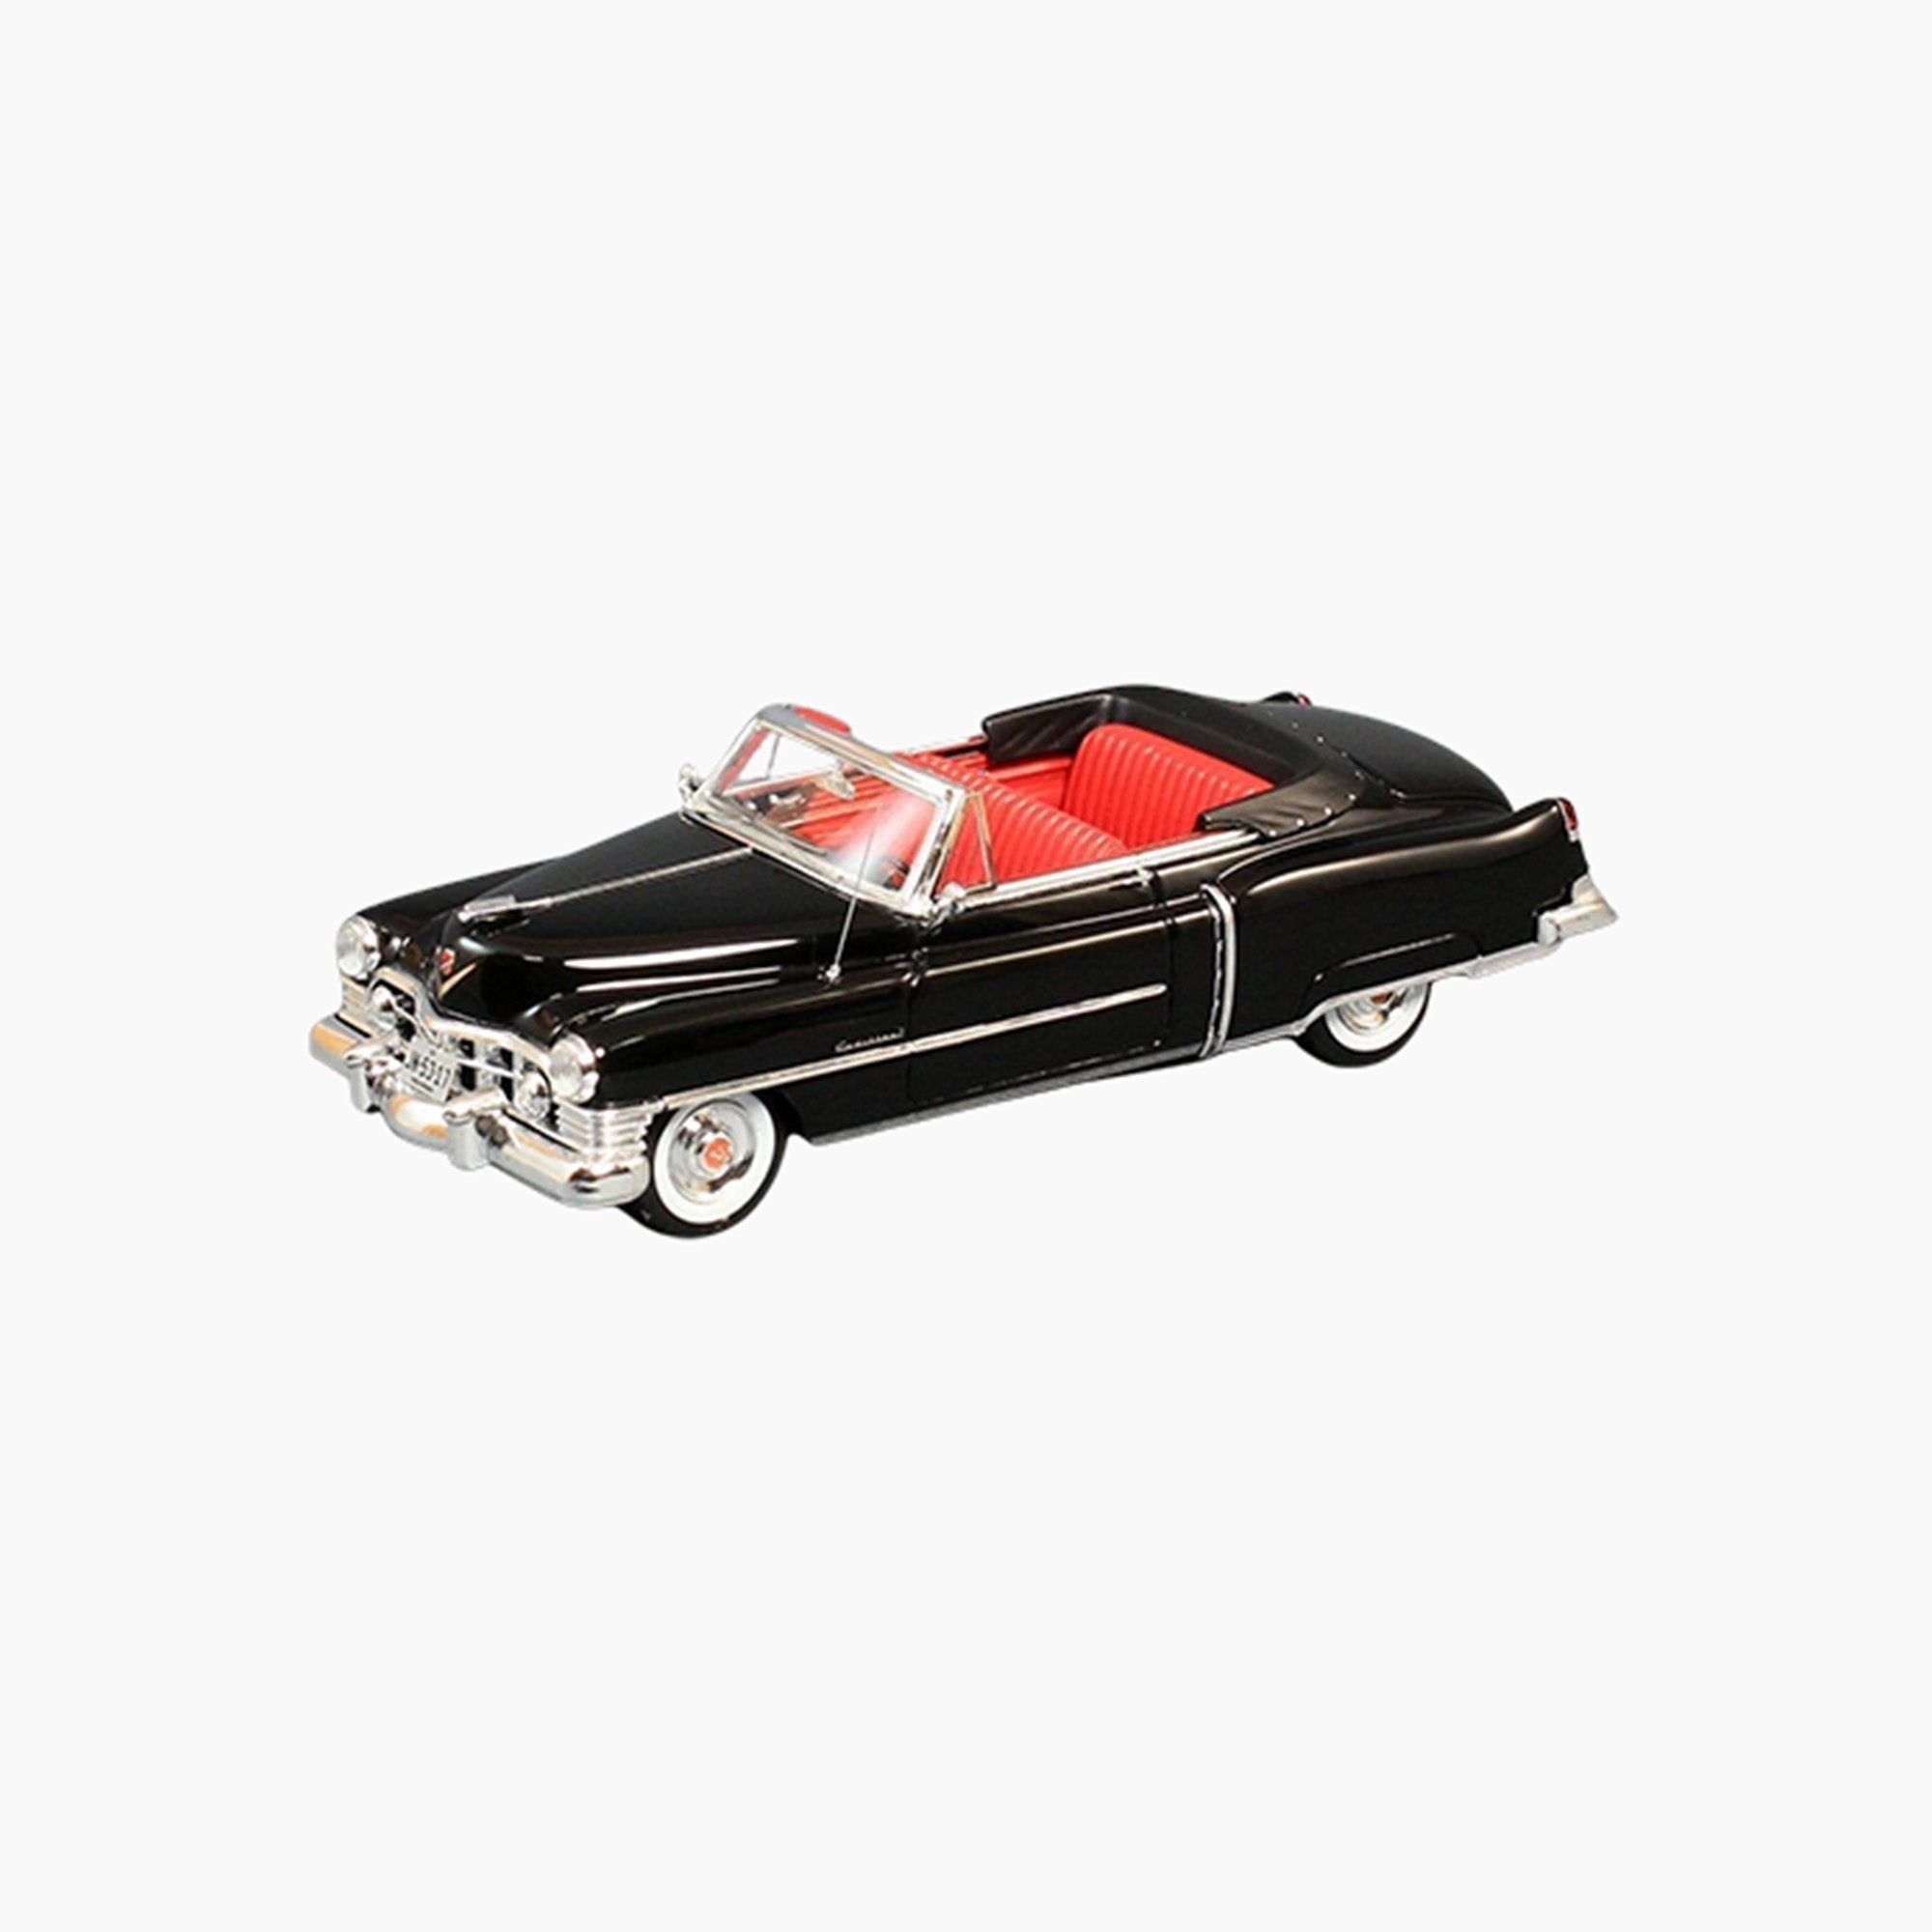 Cadillac Series 61 Convertible 1950 | 1:43 Scale Model-1:43 Scale Model-Spark Models-gpx-store